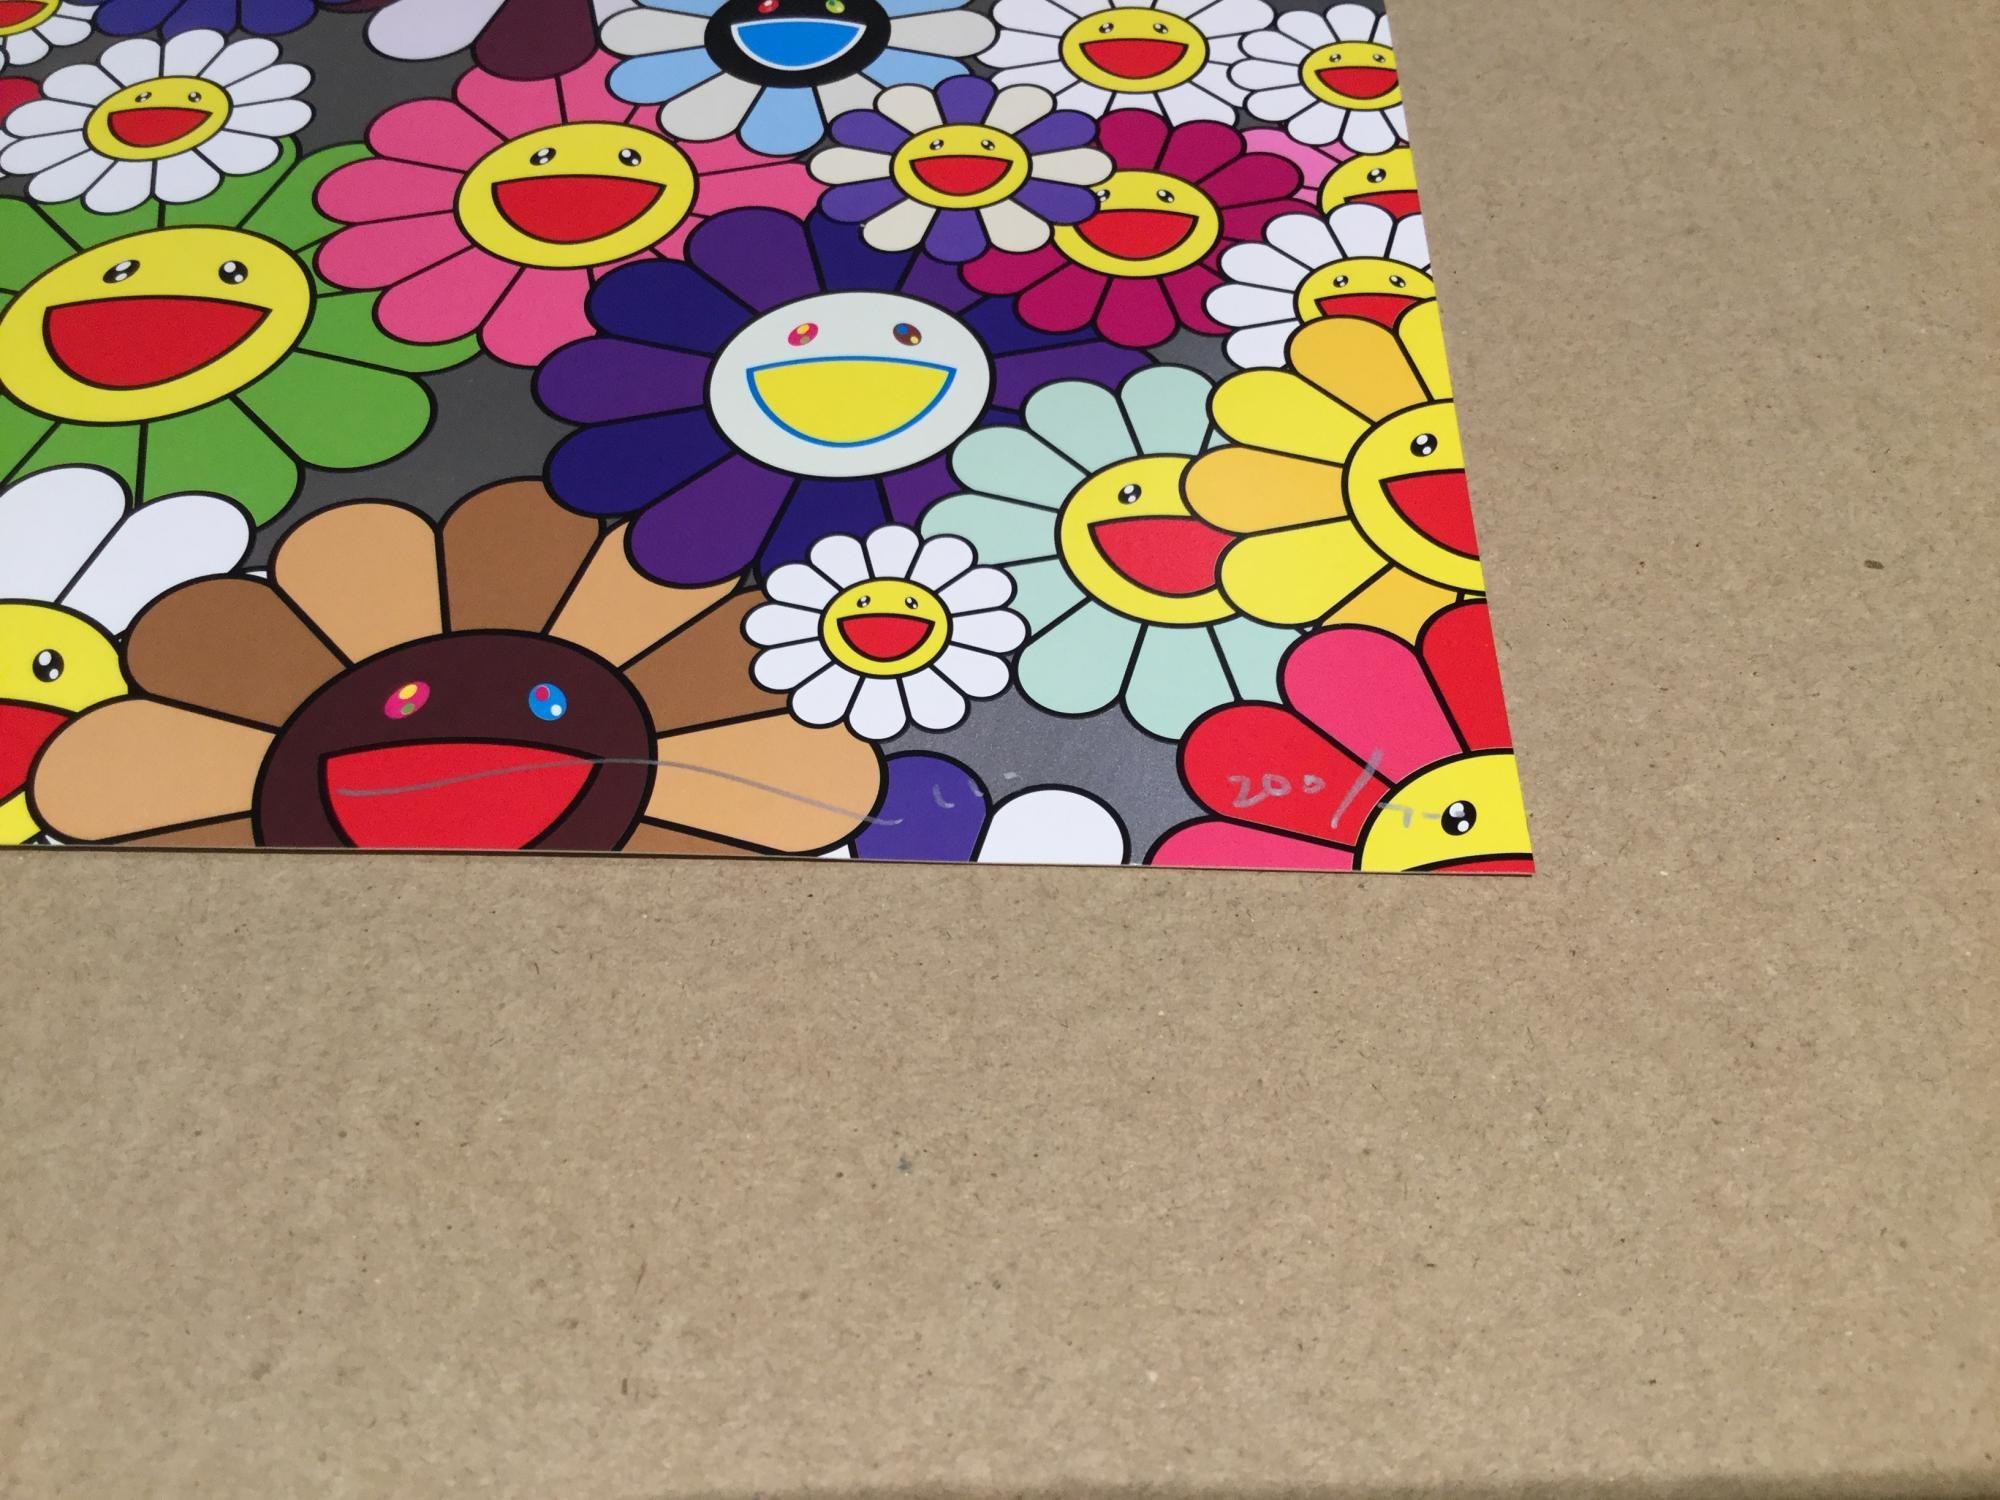 Flowers, Flowers, Flowers. Limited Edition signed and numbered by Murakami 1